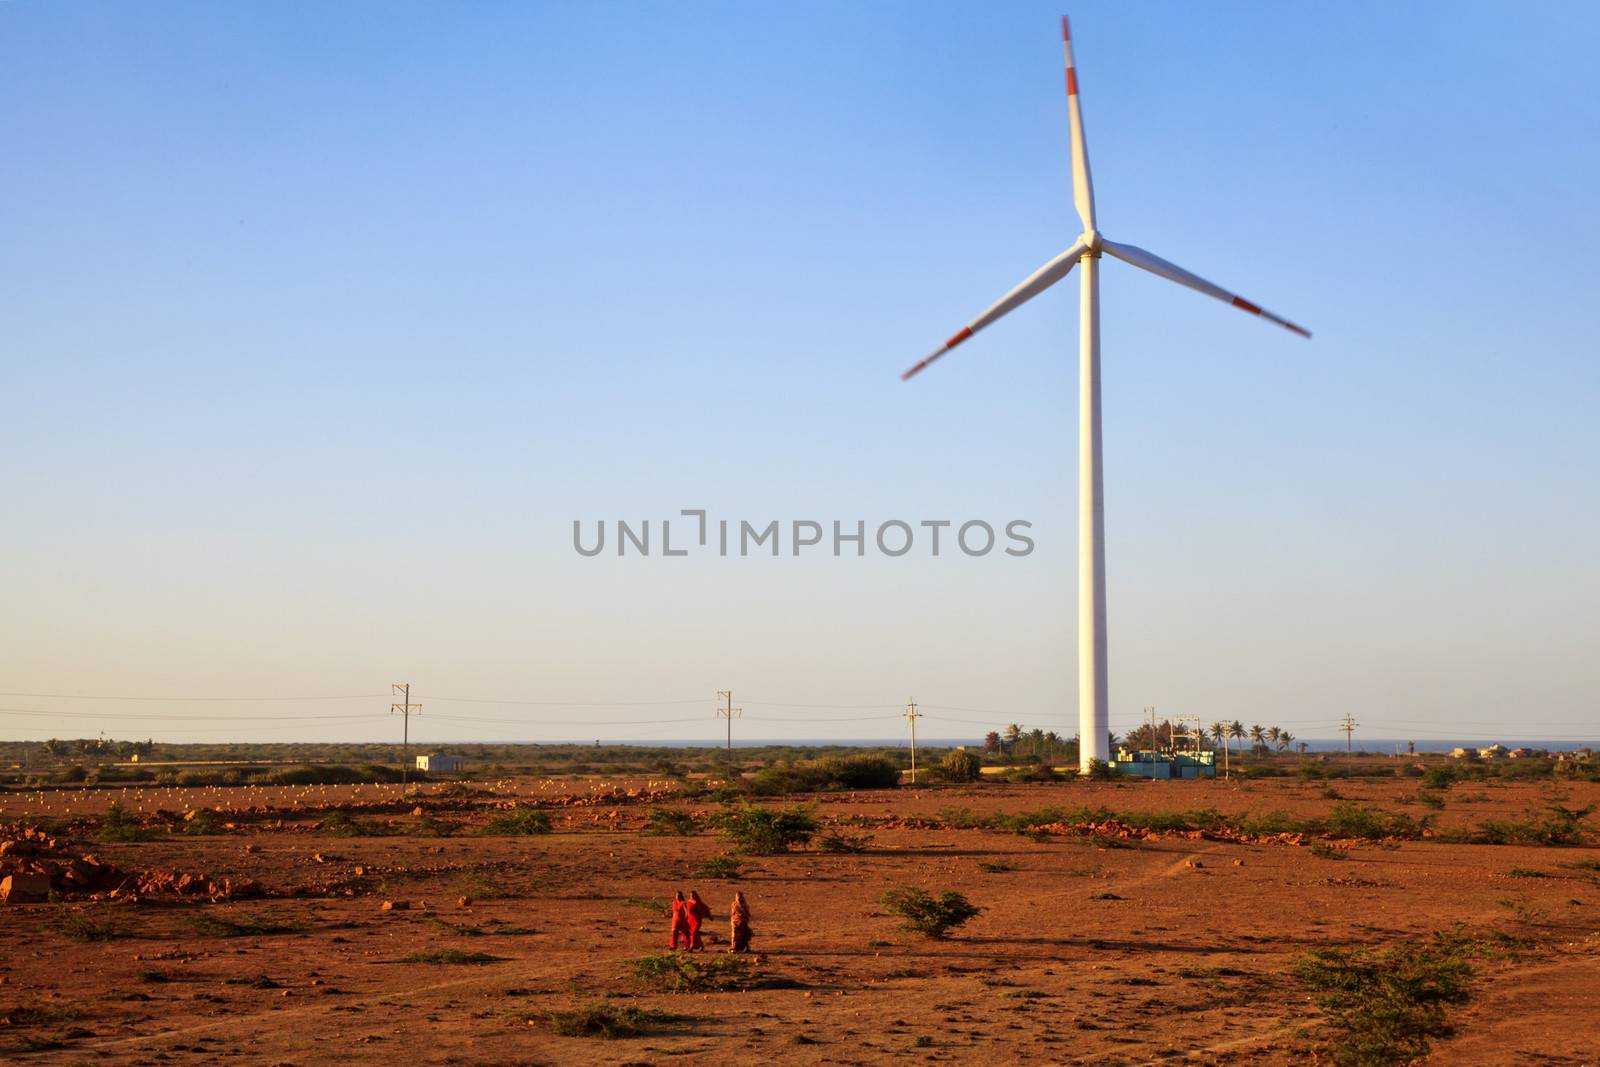 Horizontal color landscape captured in Gujarat India in the early morning before the sun rises of a group of women walking away across barren fields and a windmill generator